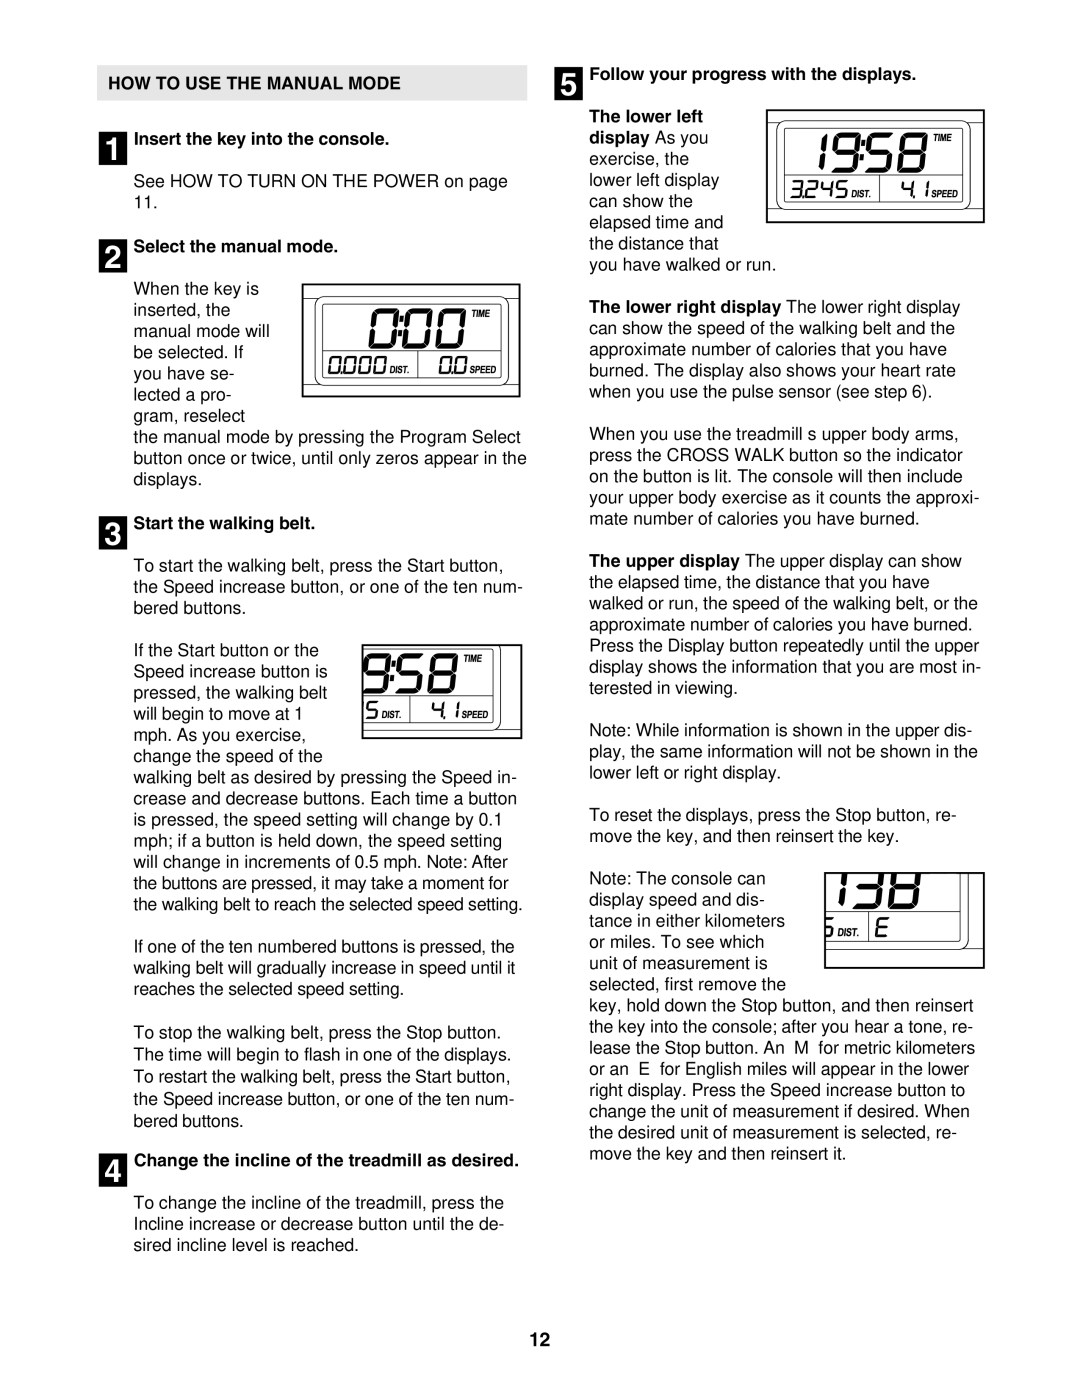 ProForm 831.24623.0 user manual HOW to USE the Manual Mode, Follow your progress with the displays, Select the manual mode 